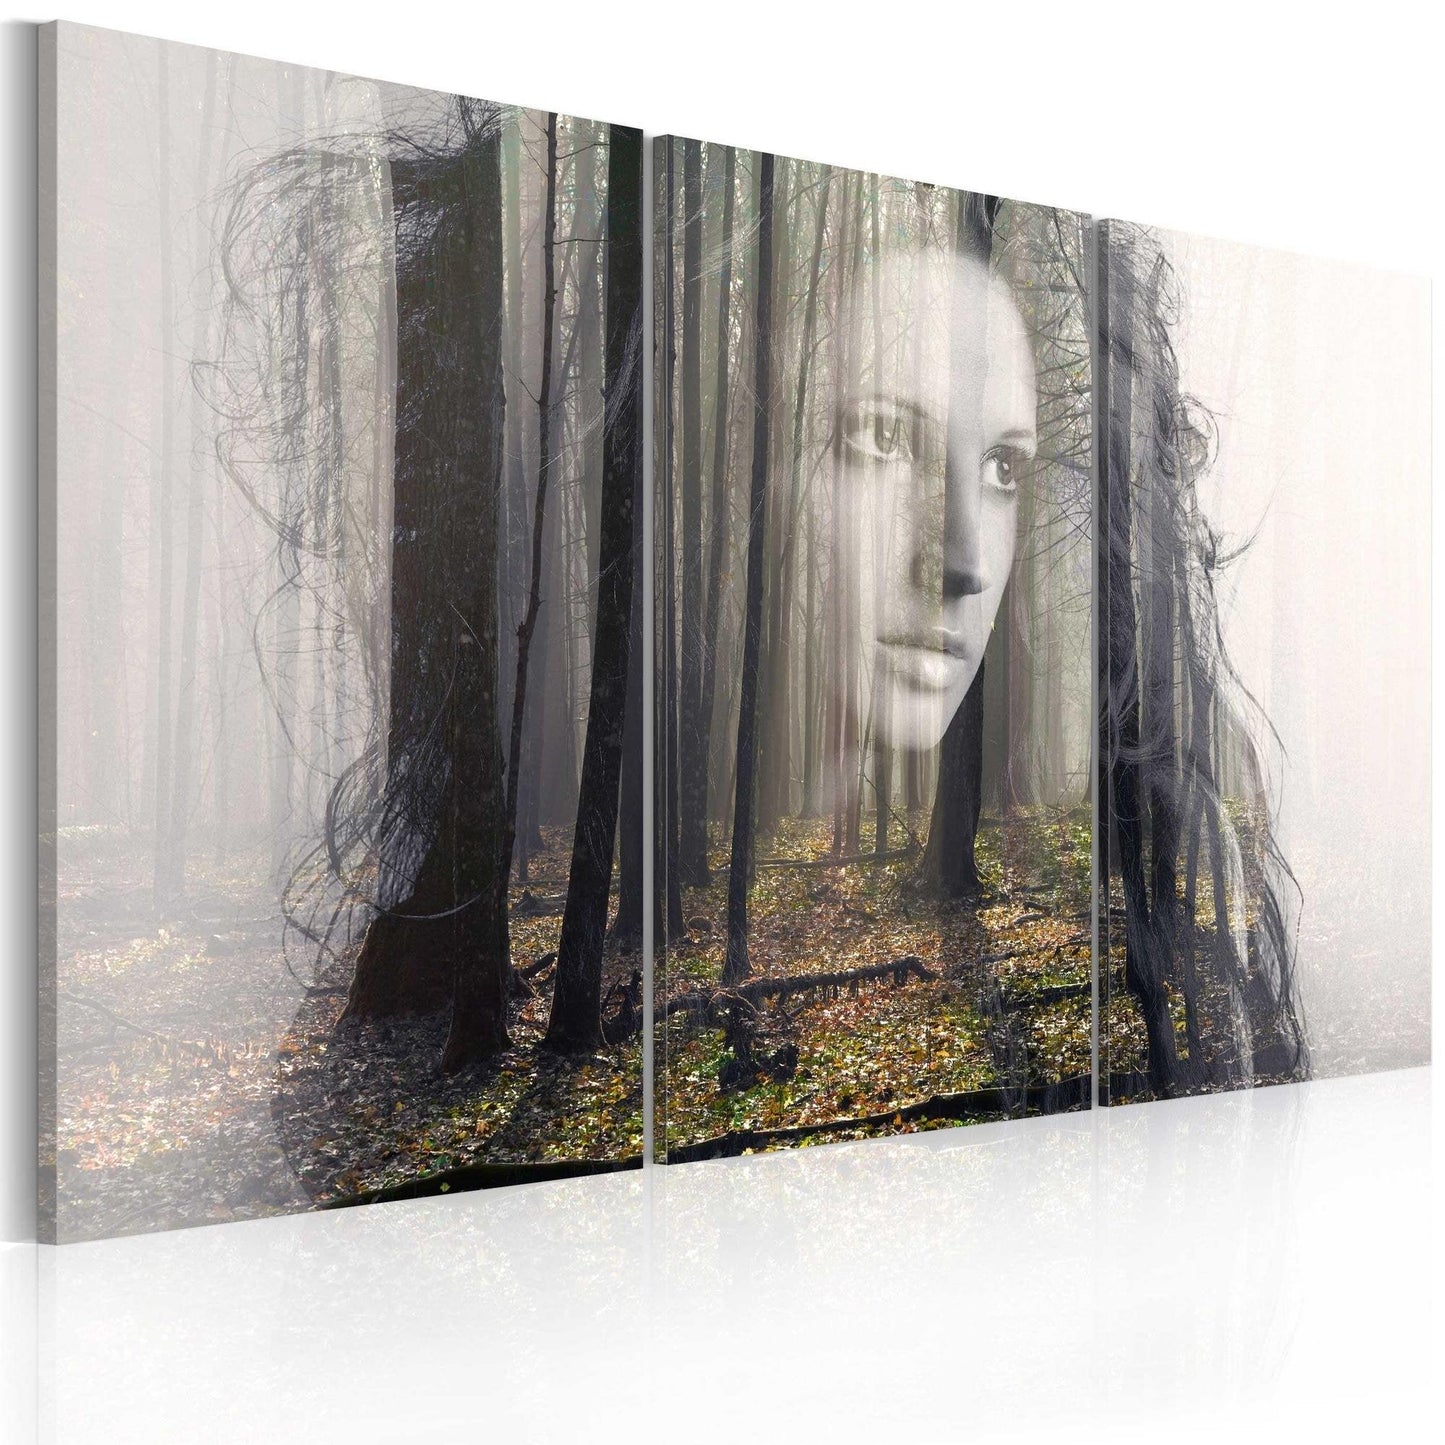 Canvas Print - Forest nymph - www.trendingbestsellers.com